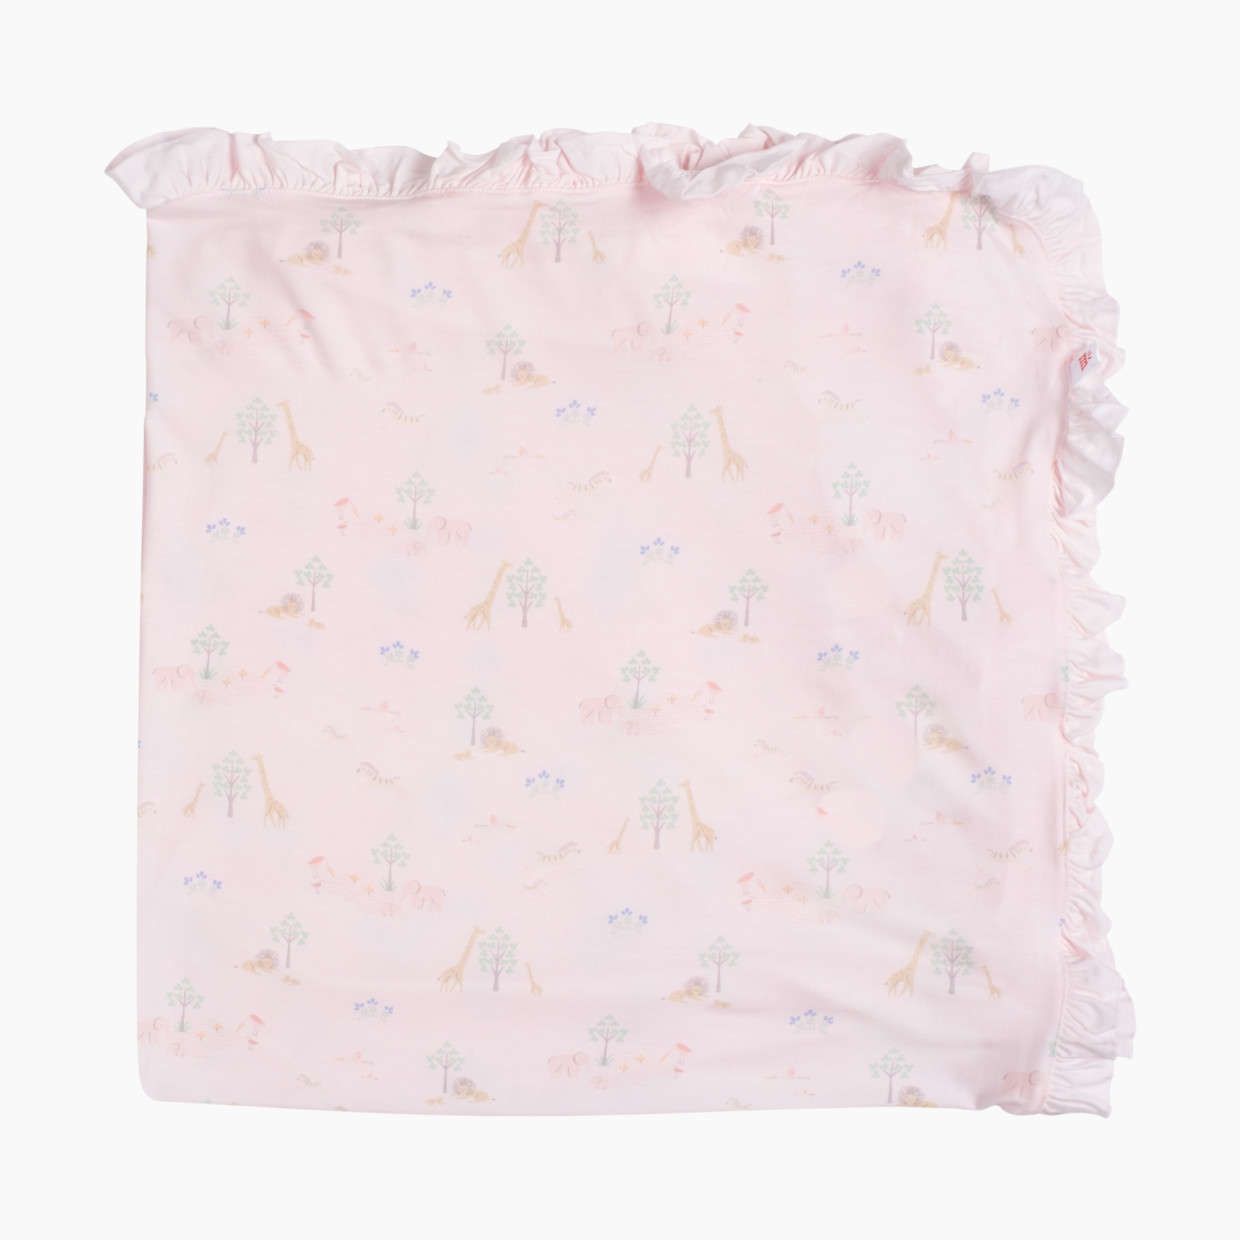 Magnetic Me Modal Baby Blanket With Ruffles - Serene Safari, One Size.